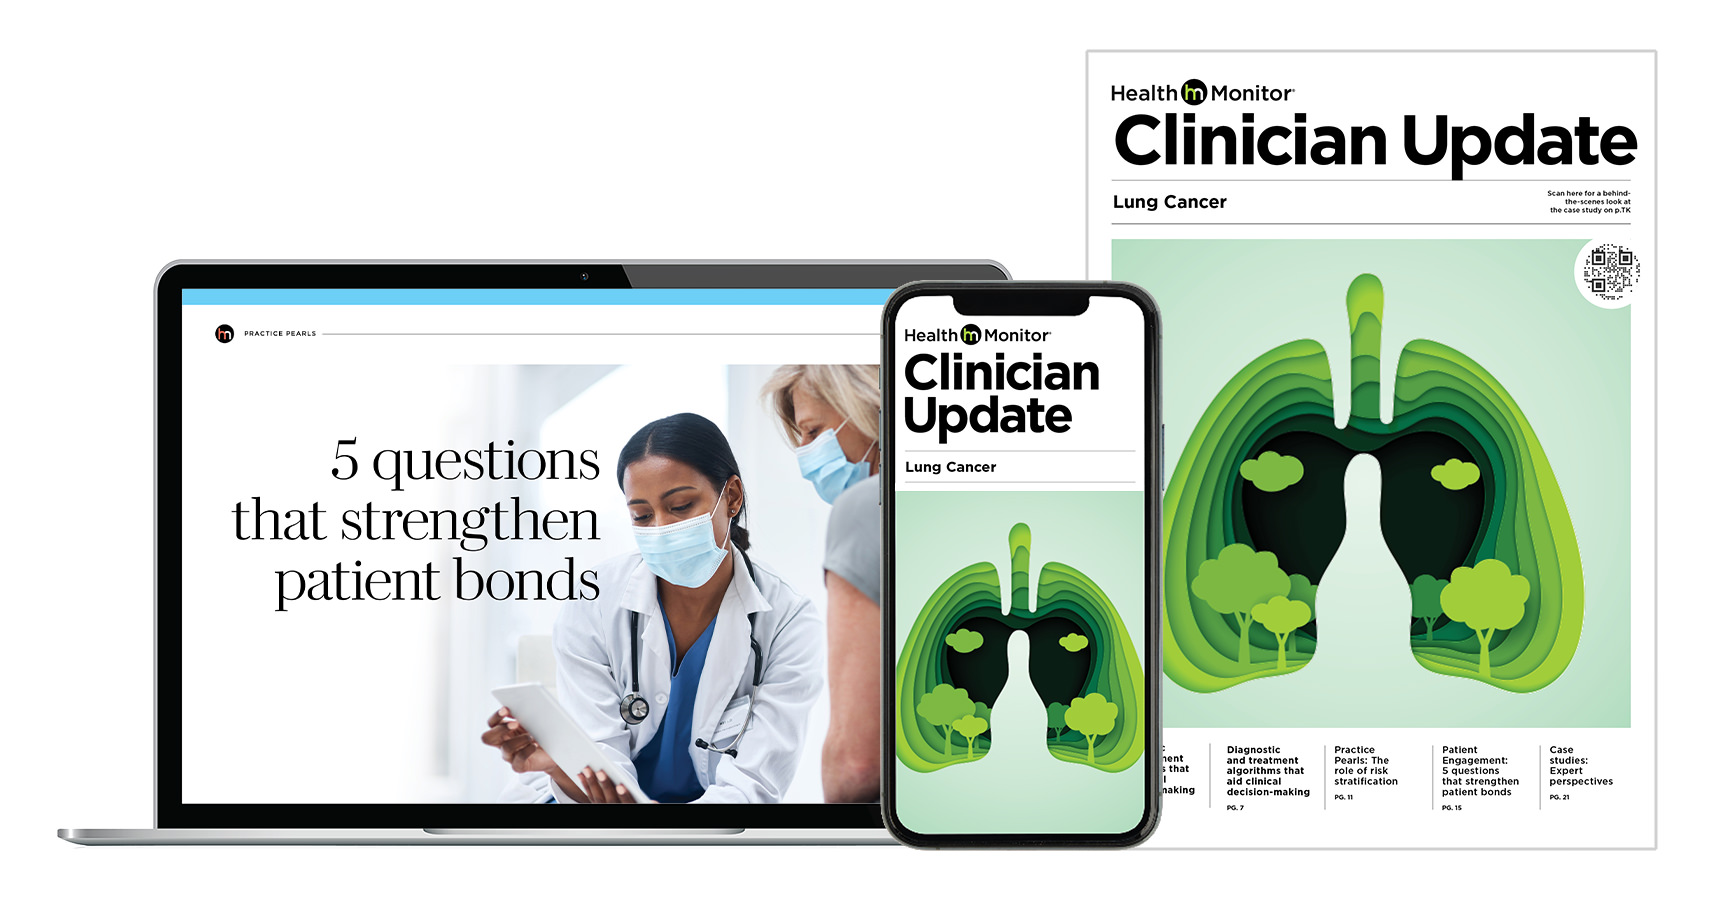 Health Monitor Clinician Update™ (Digital & Print) targeted to HCPs.